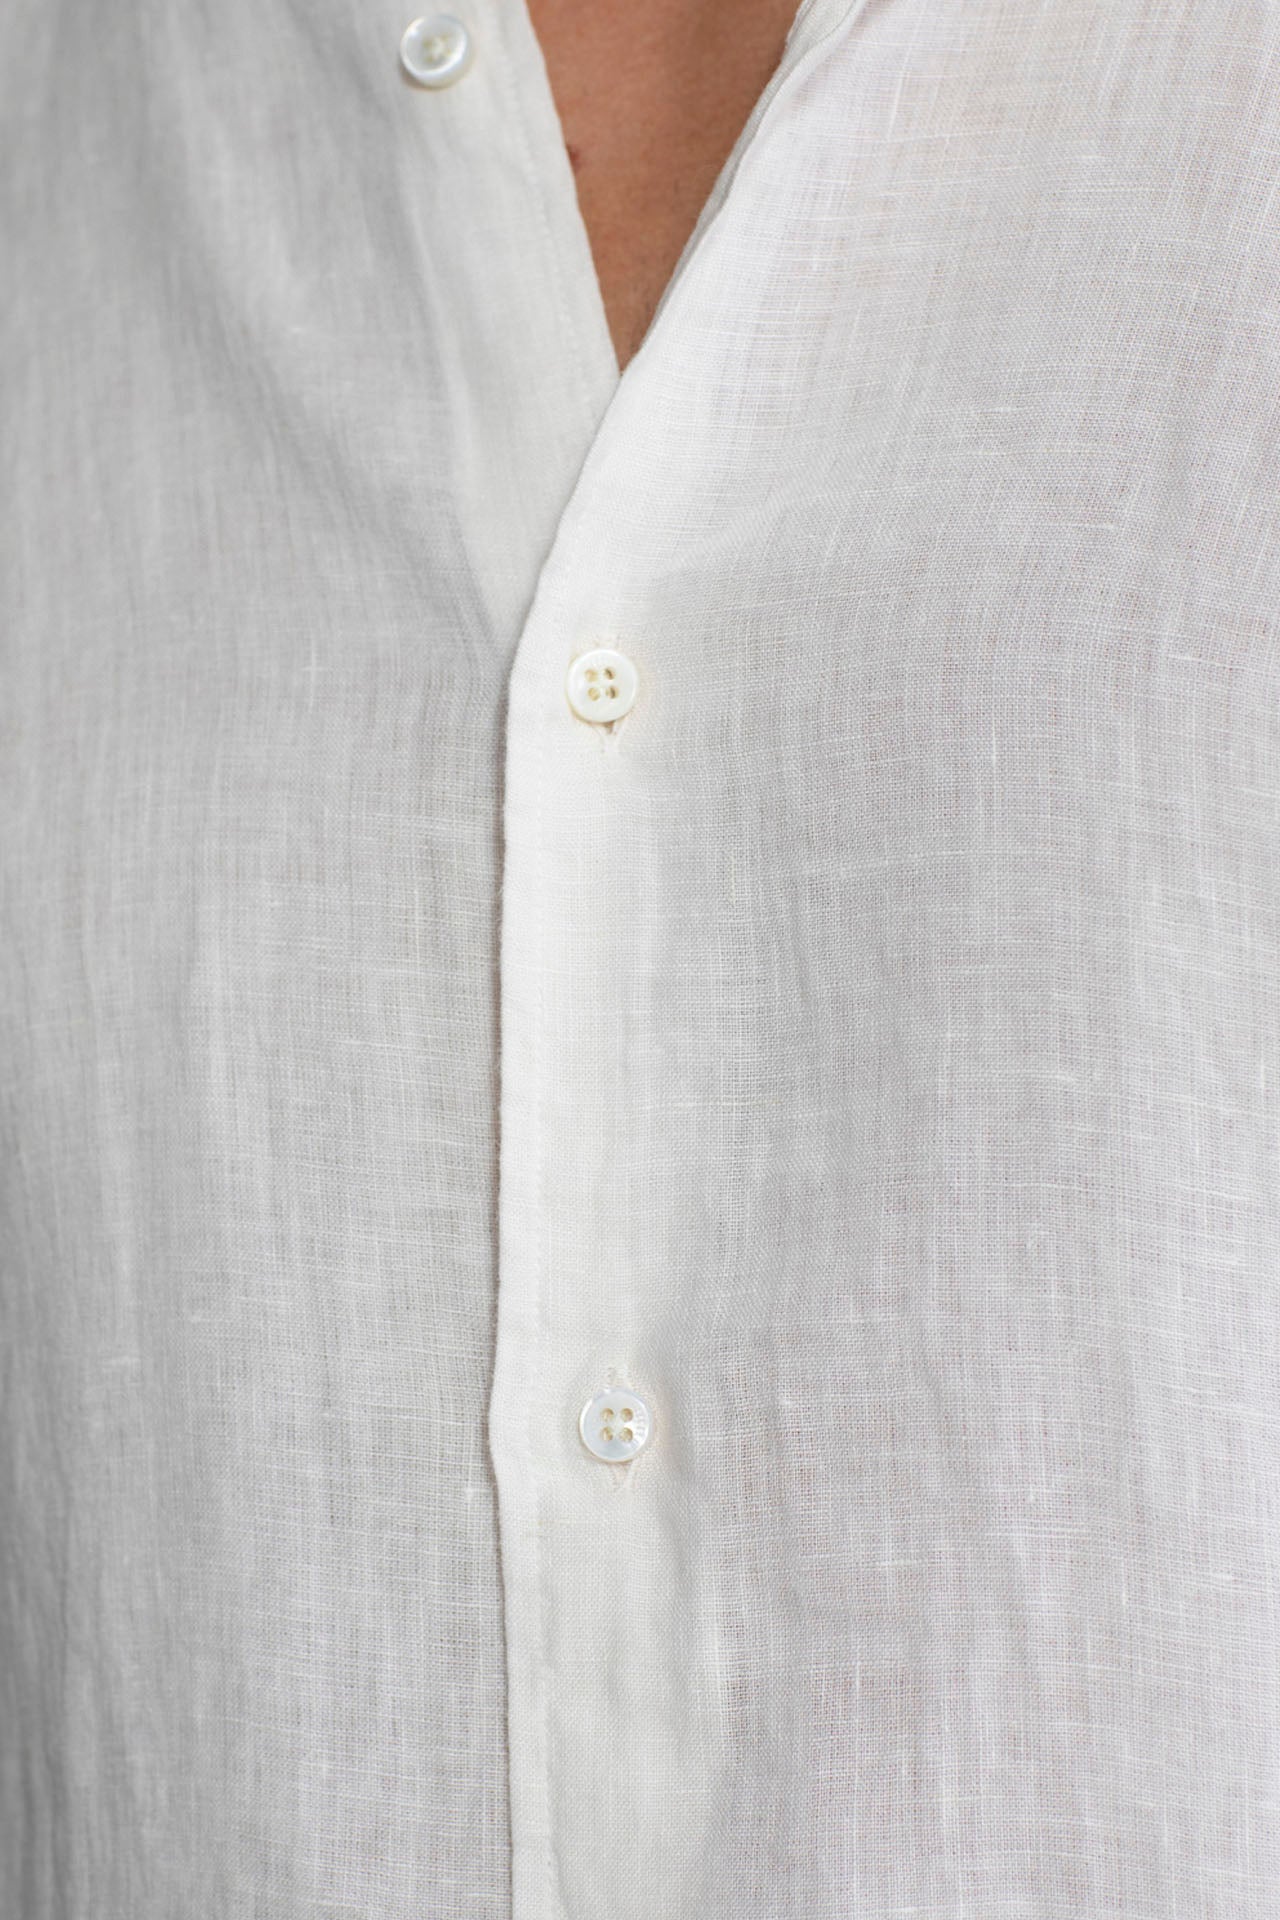 Men's Linen Shirts with Long Sleeve - White - Buttons detaill